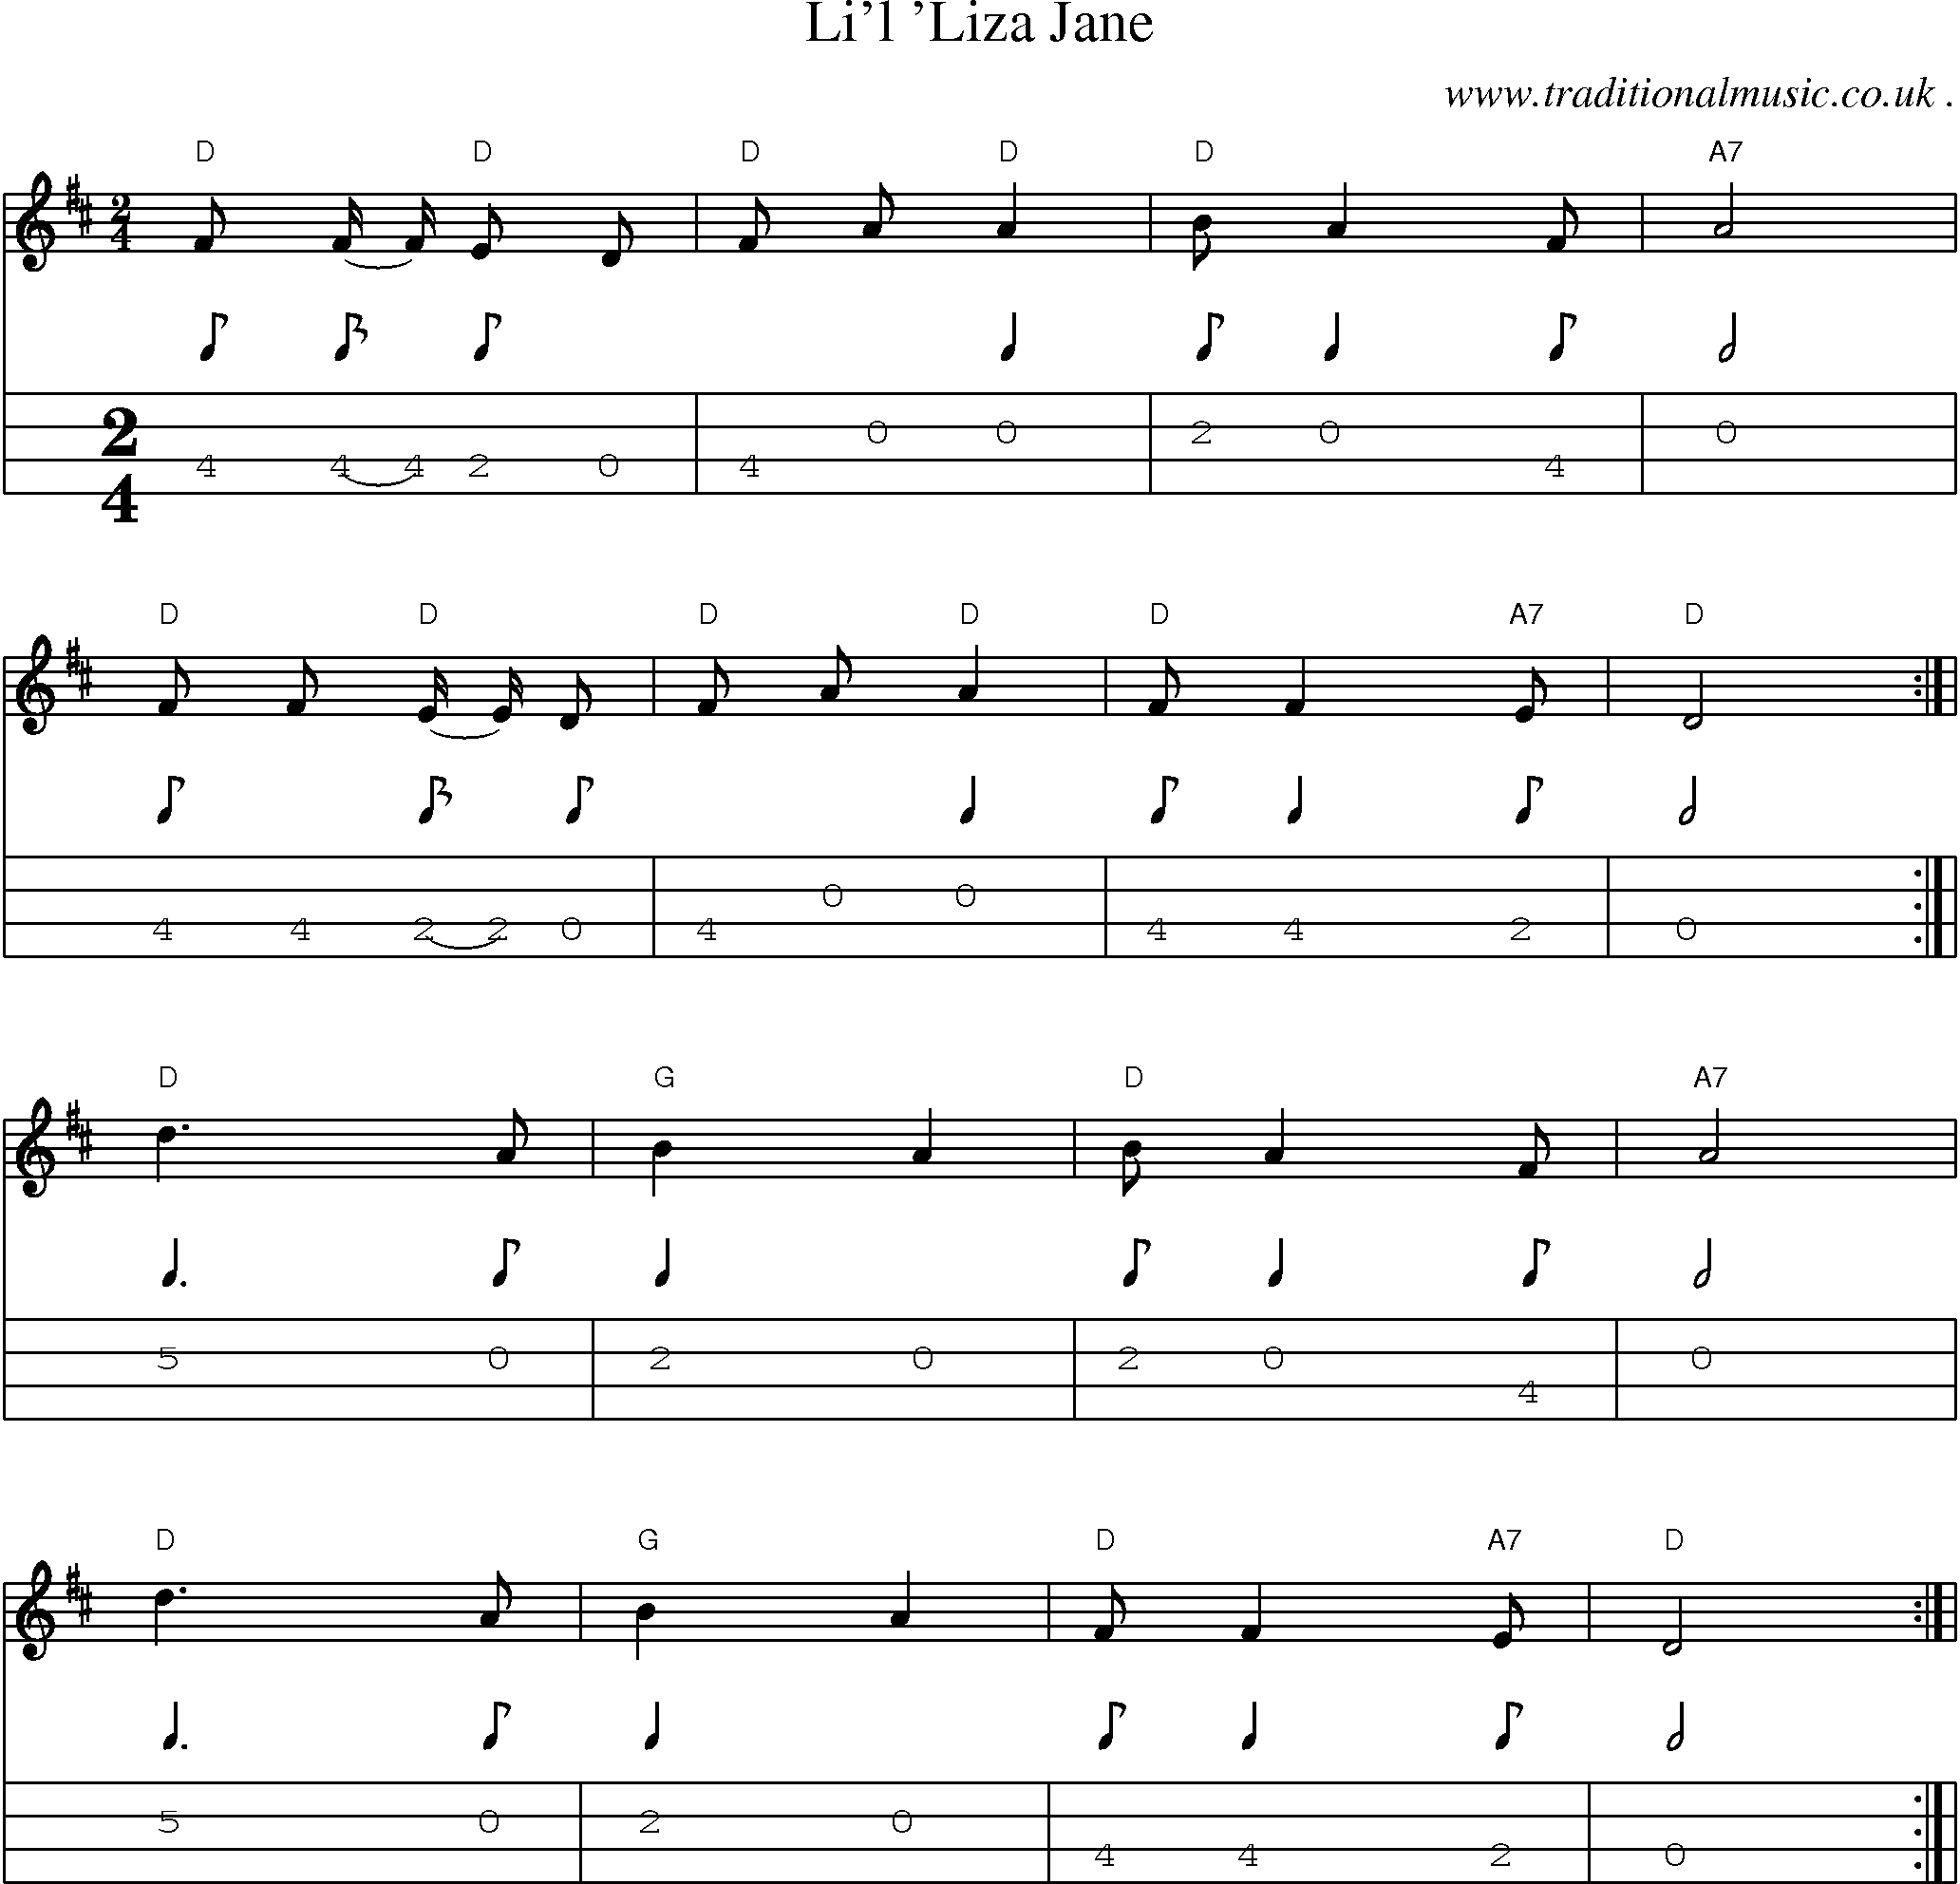 Music Score and Mandolin Tabs for Lil liza Jane